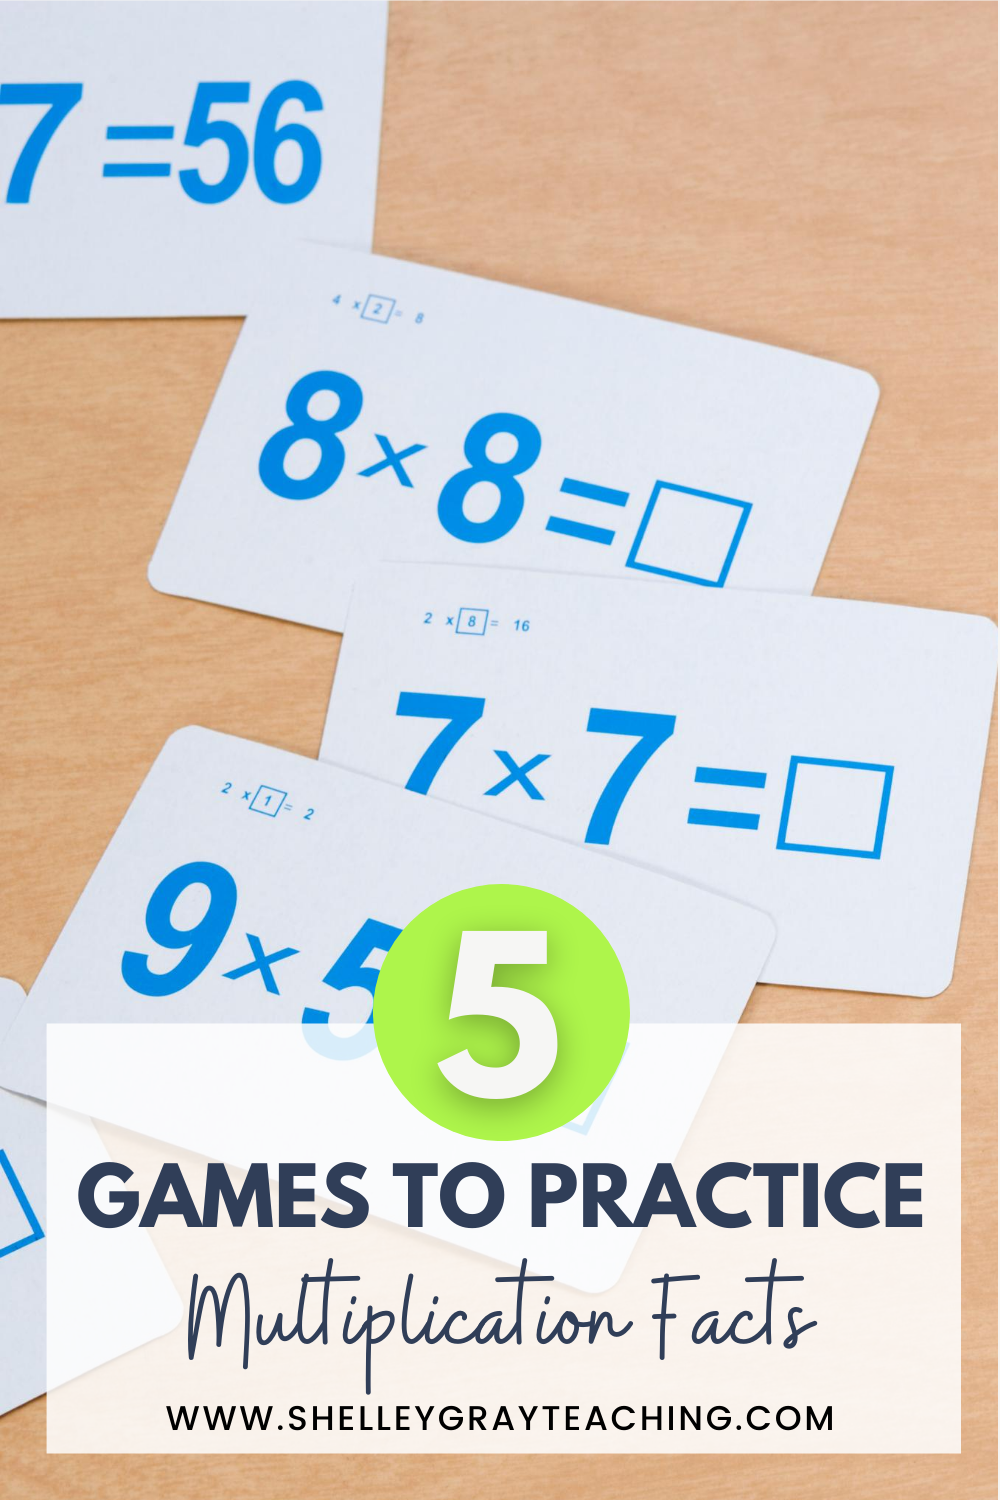 5 Games to Practice Multiplication Facts